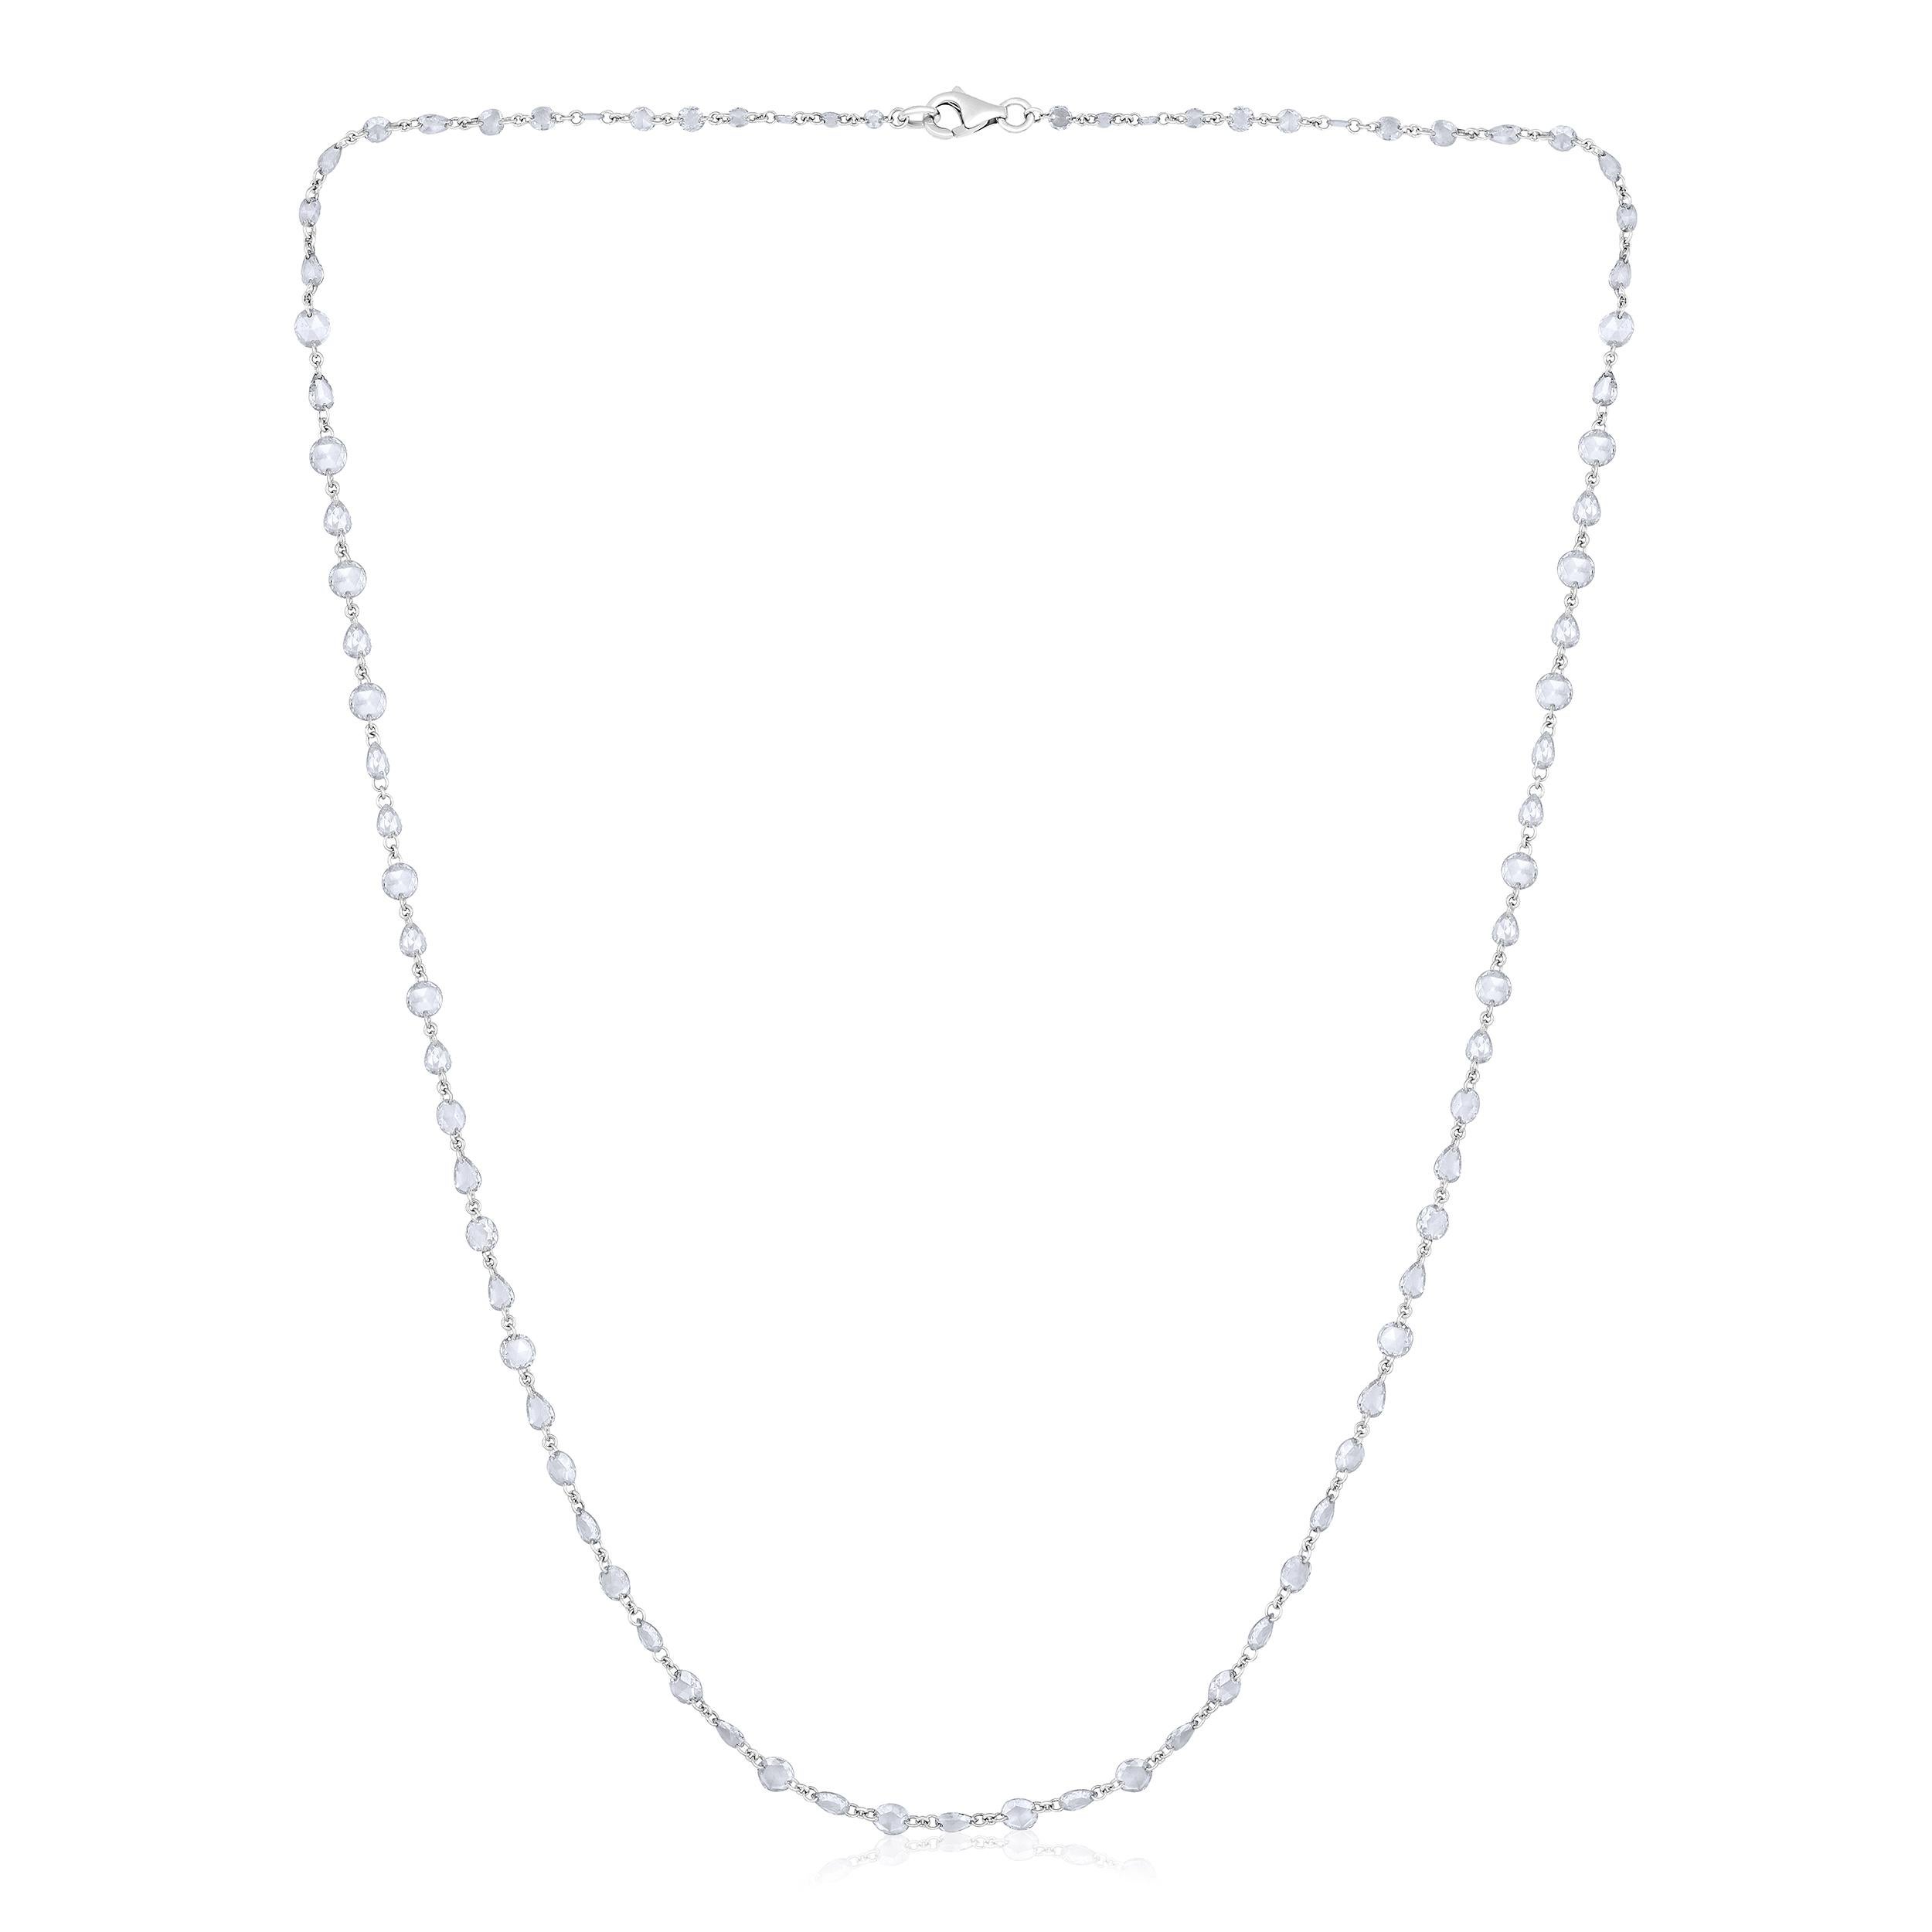 Crafted in 2.58 grams of 14K White Gold, the necklace contains 83 stones of Rose Cut Natural Diamonds with a total of 4.66 carat in E-F color and VVS-VS clarity. The necklace length is 18 inches.

CONTEMPORARY AND TIMELESS ESSENCE: Crafted in